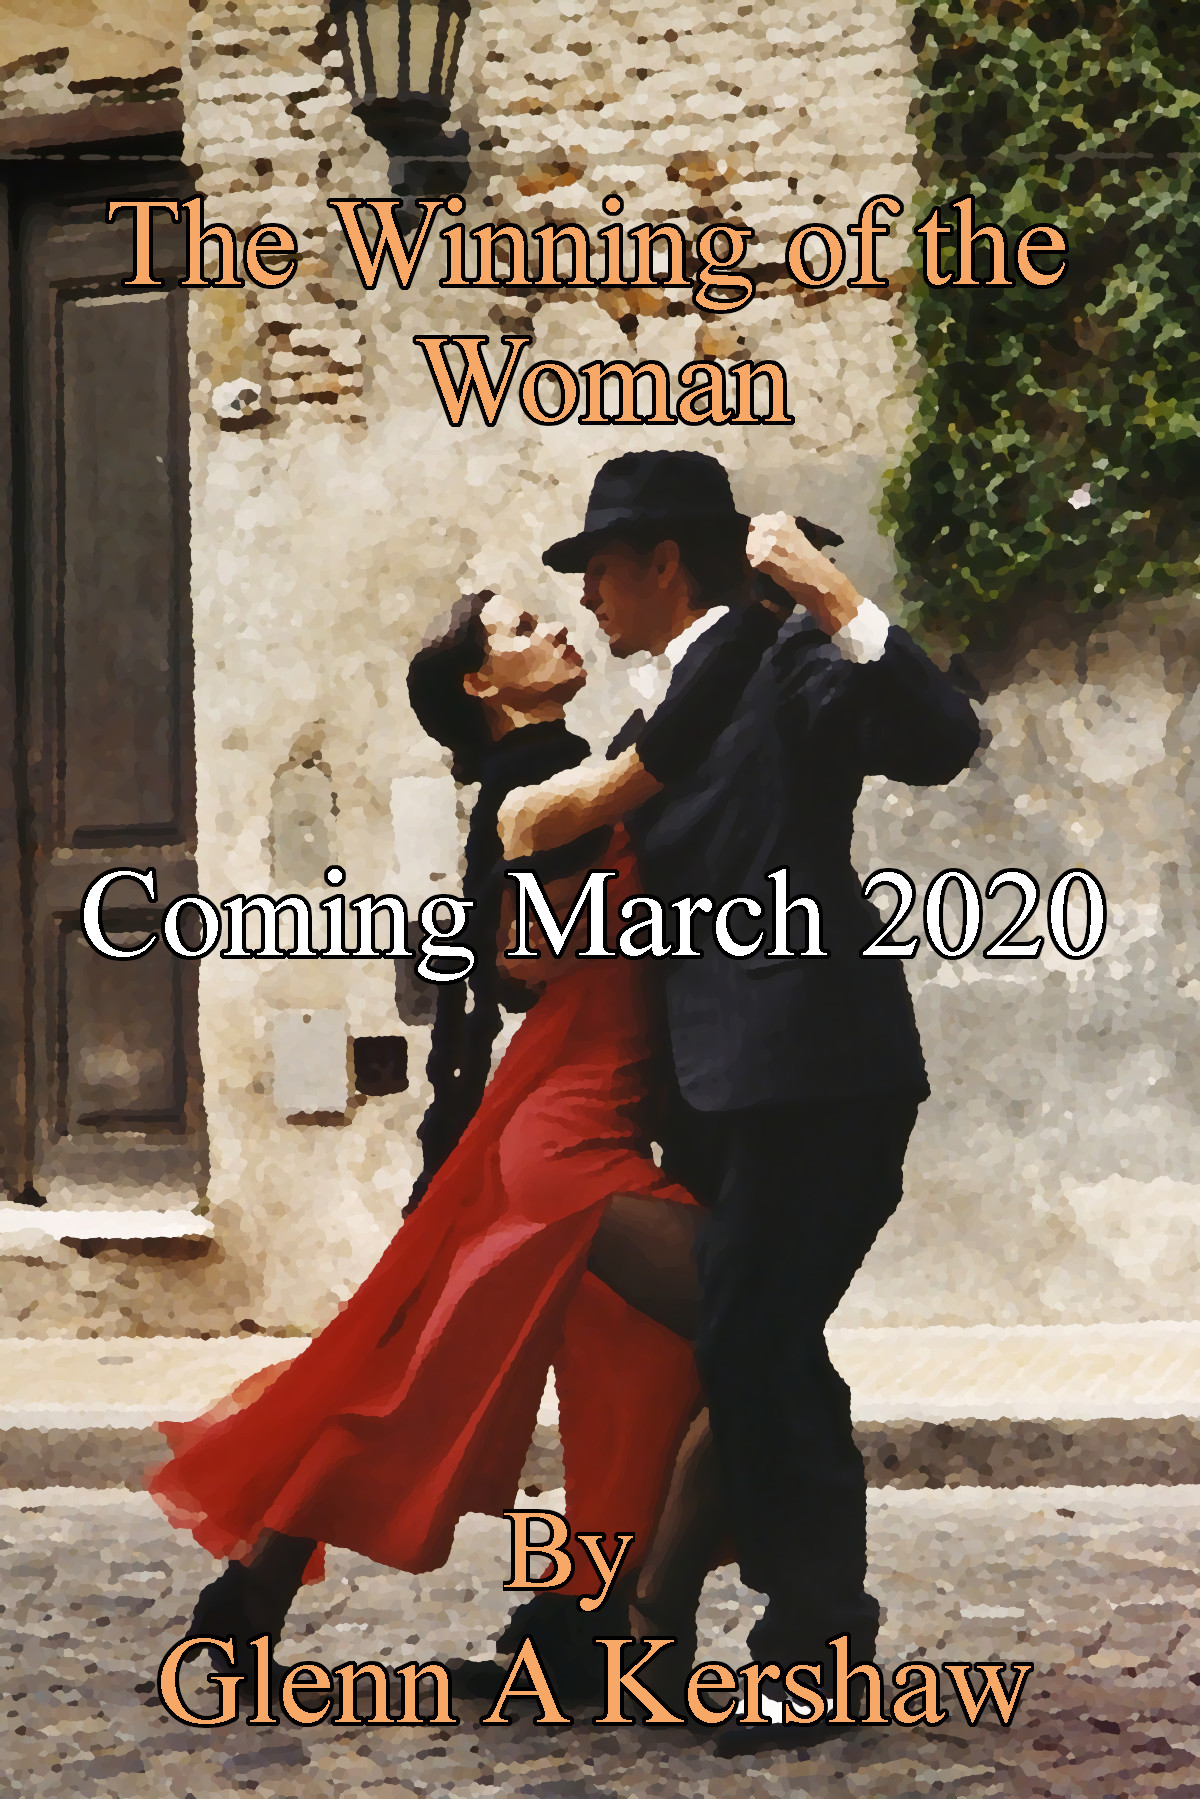 The Winning of the Woman cover art: Comming March 2020